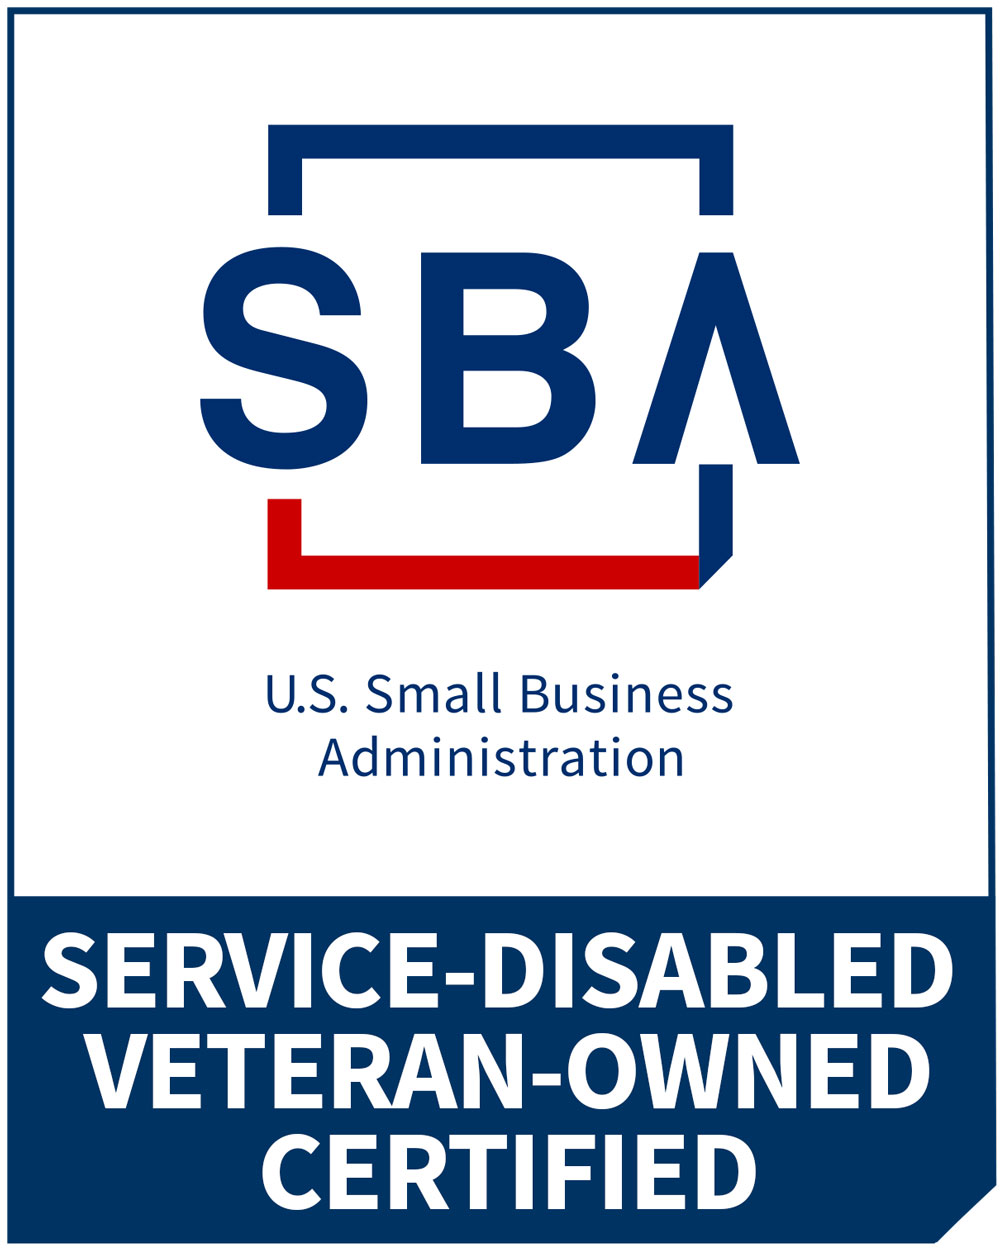 Service-disabled veteran owned certification